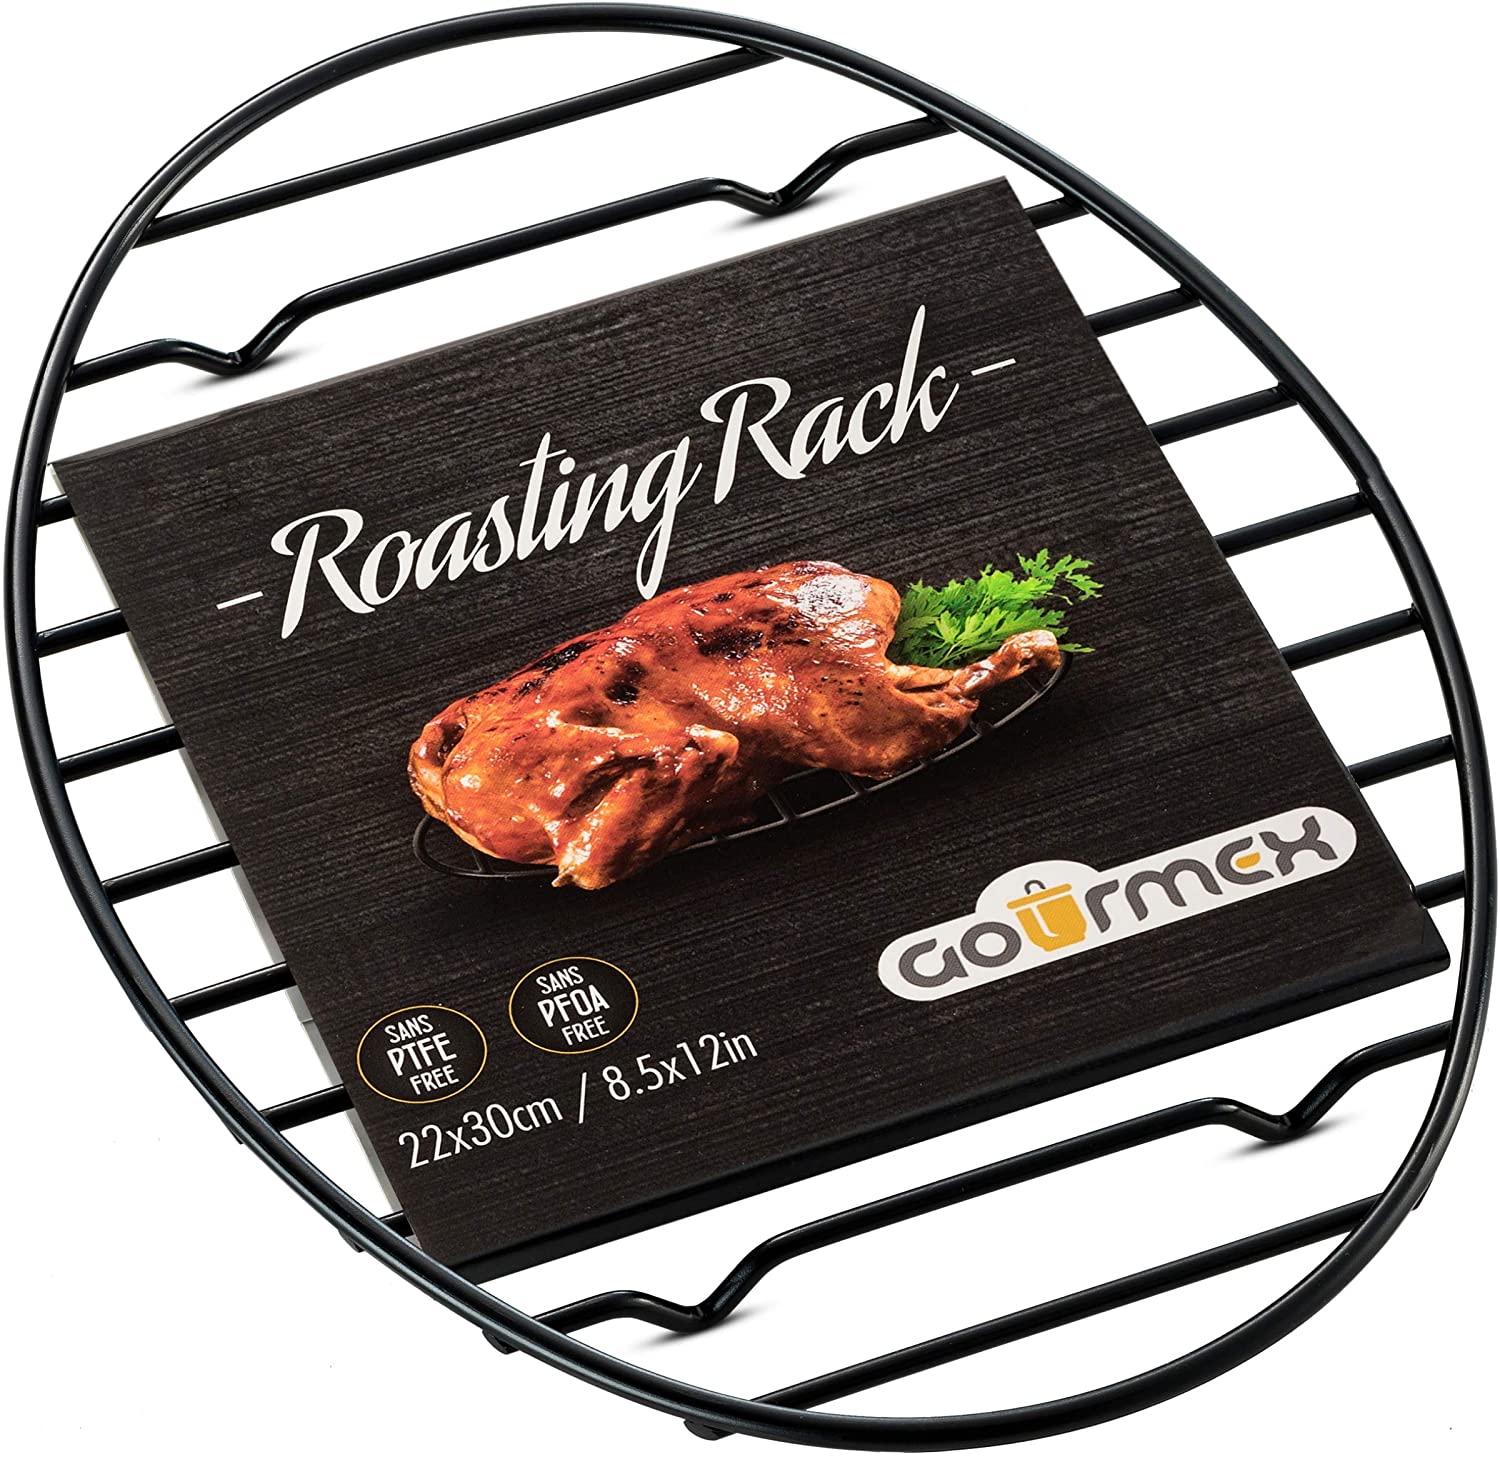 Oval Roasting Rack With Integrated Feet, Black - Non-stick Whitford Coating 8.5x12""